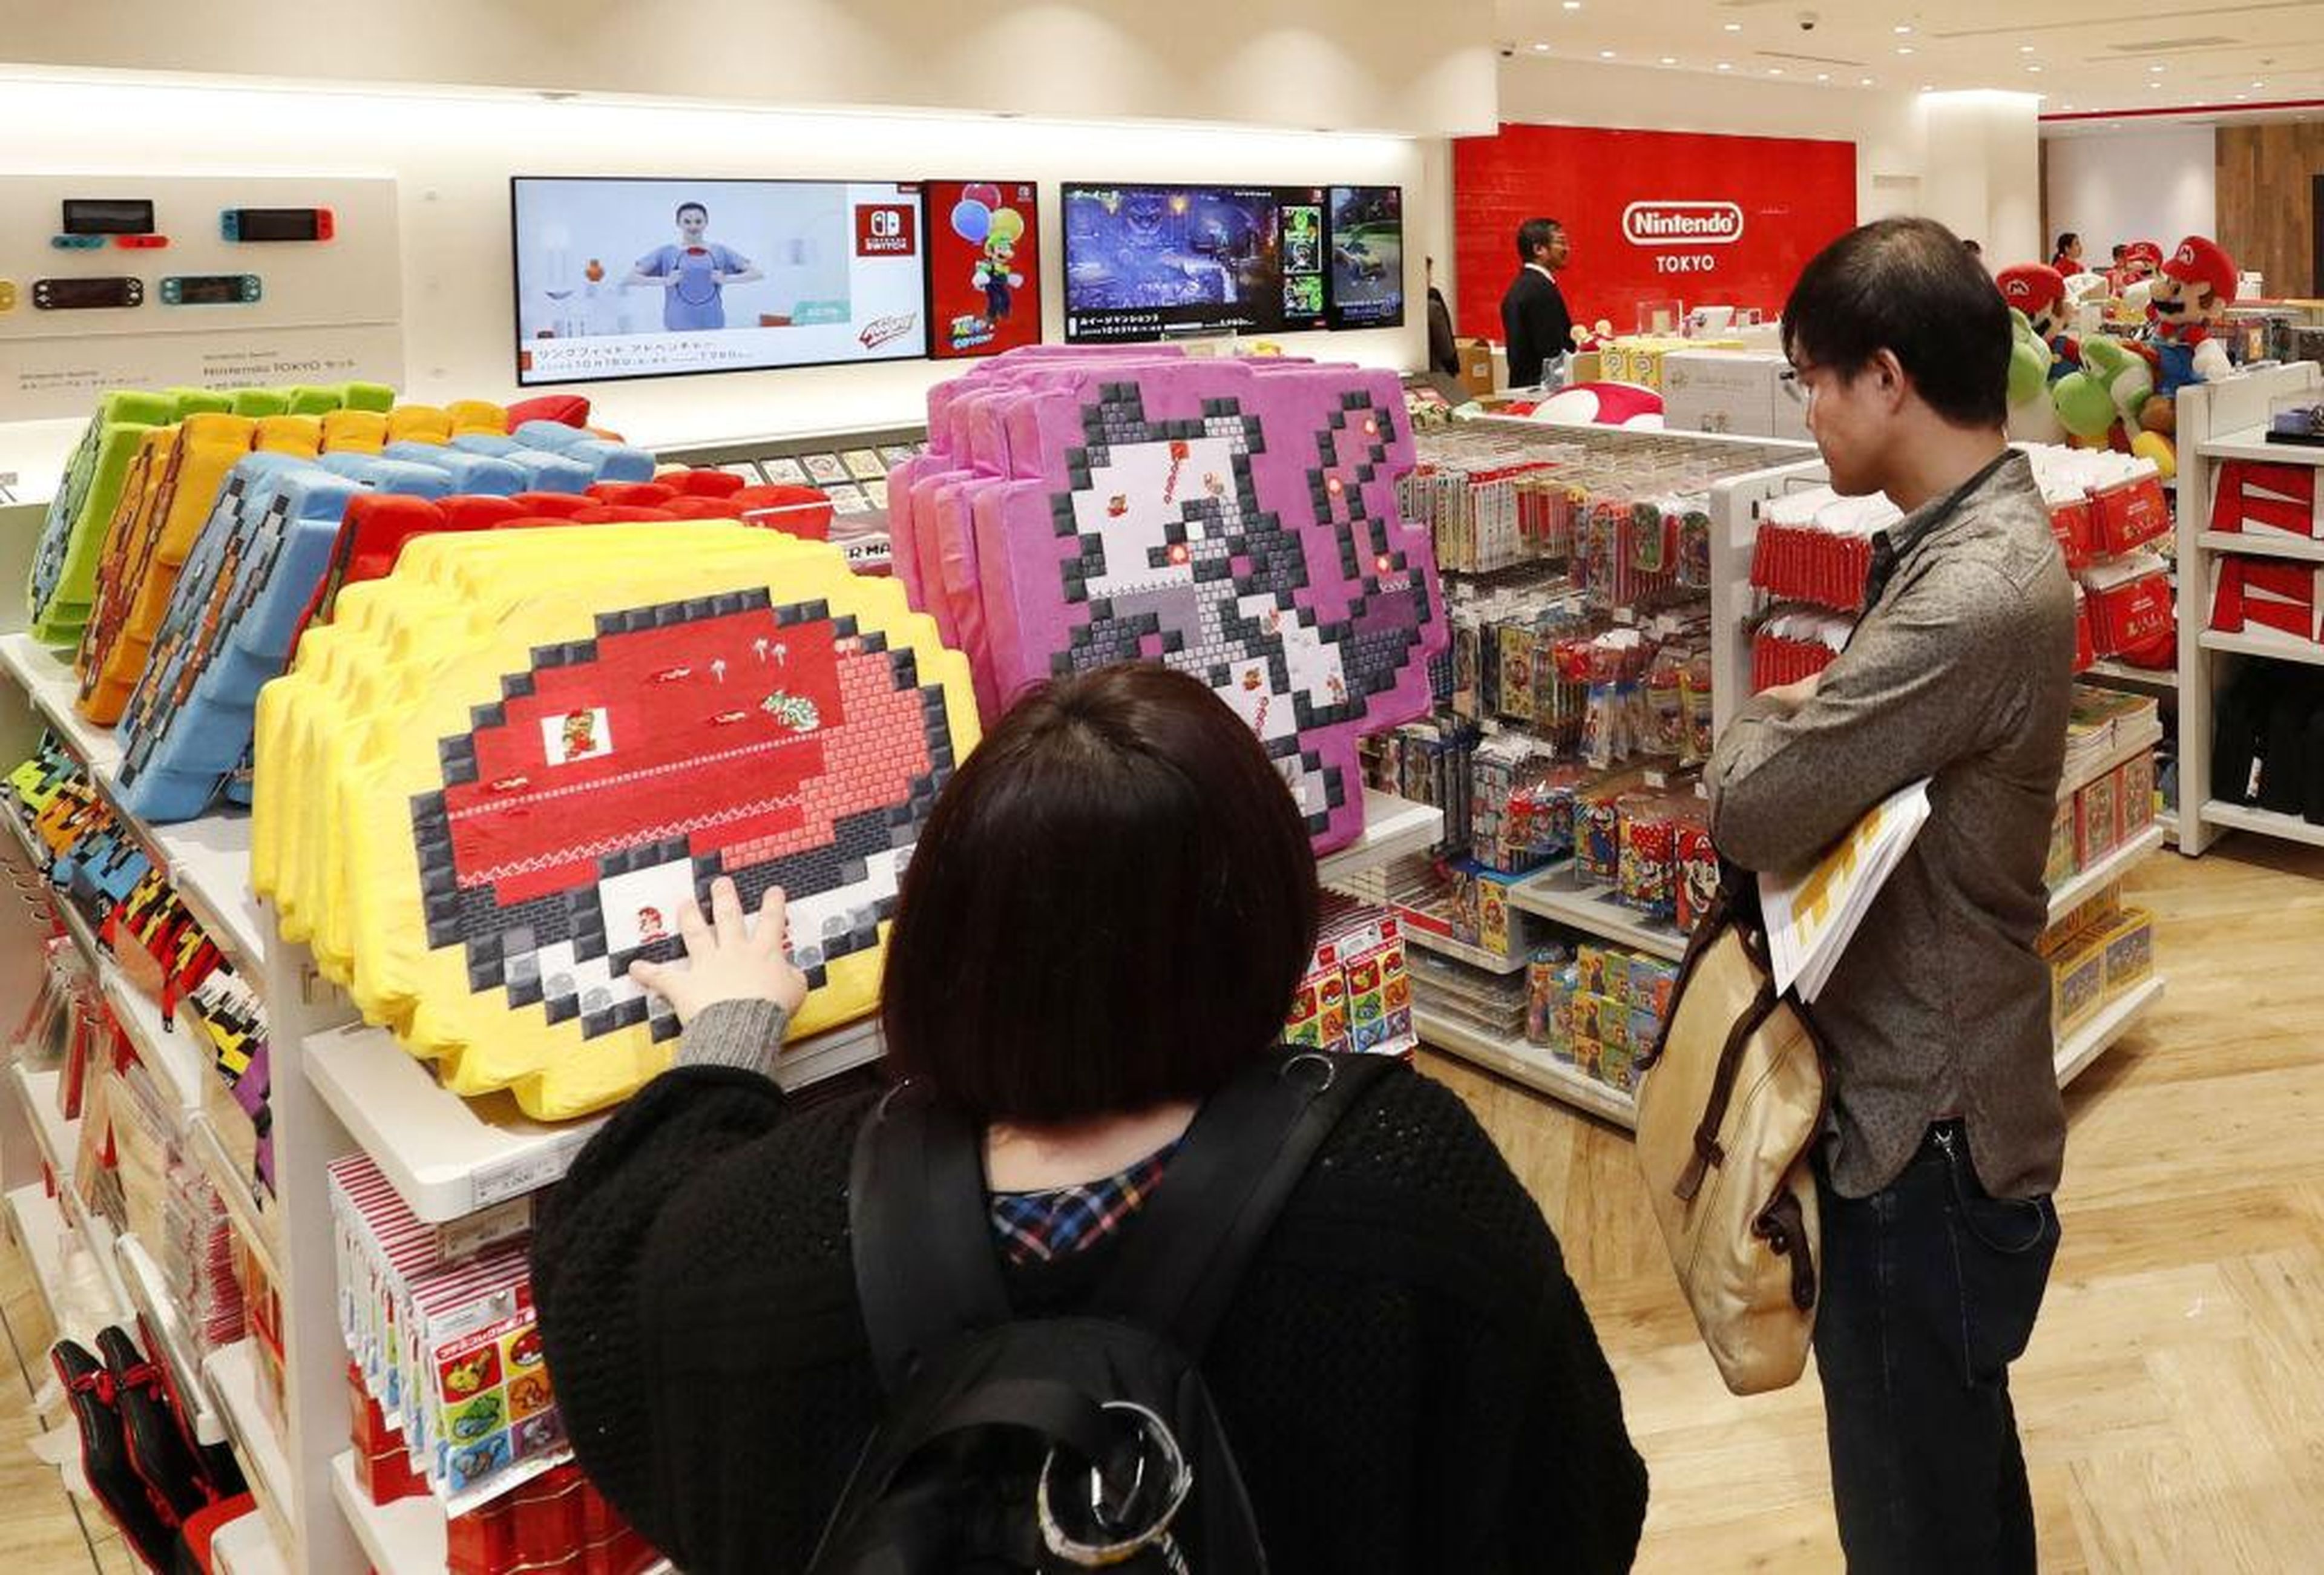 Nintendo launched a bunch of new licensed products to prepare for the opening of Nintendo Tokyo.